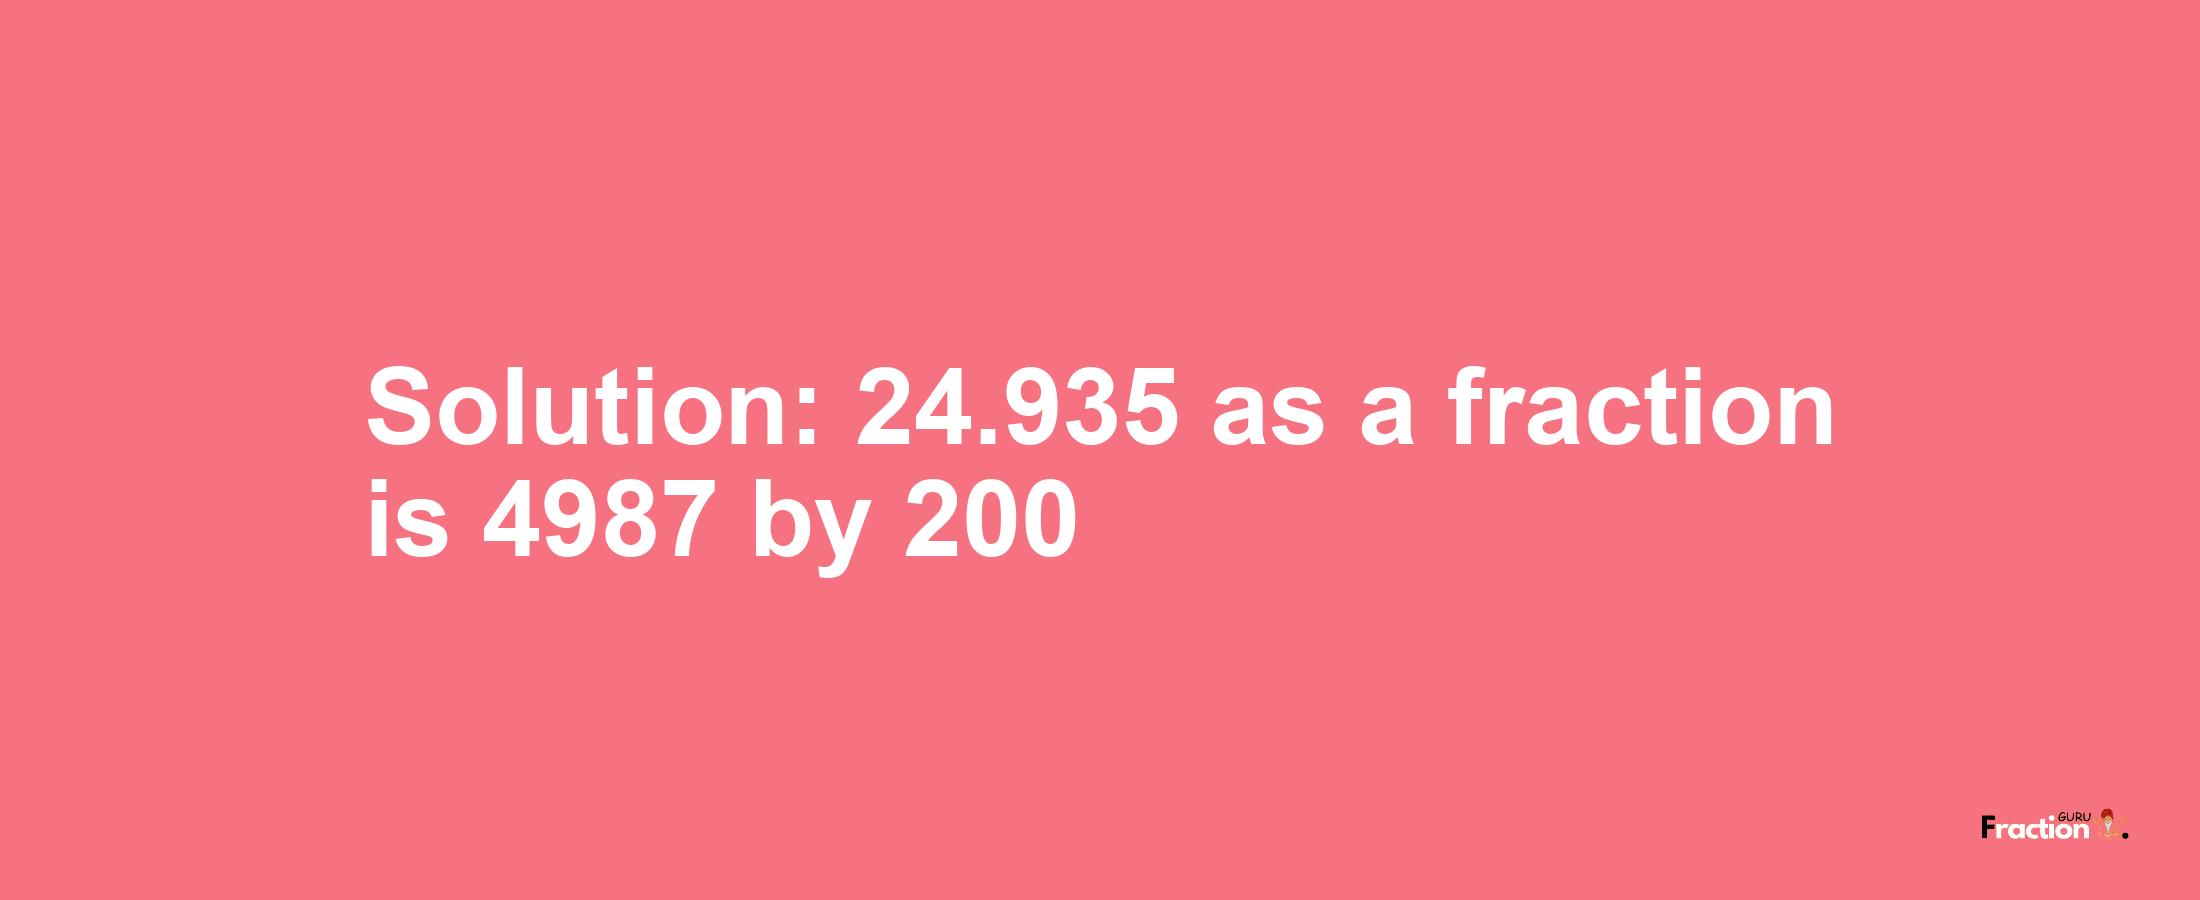 Solution:24.935 as a fraction is 4987/200